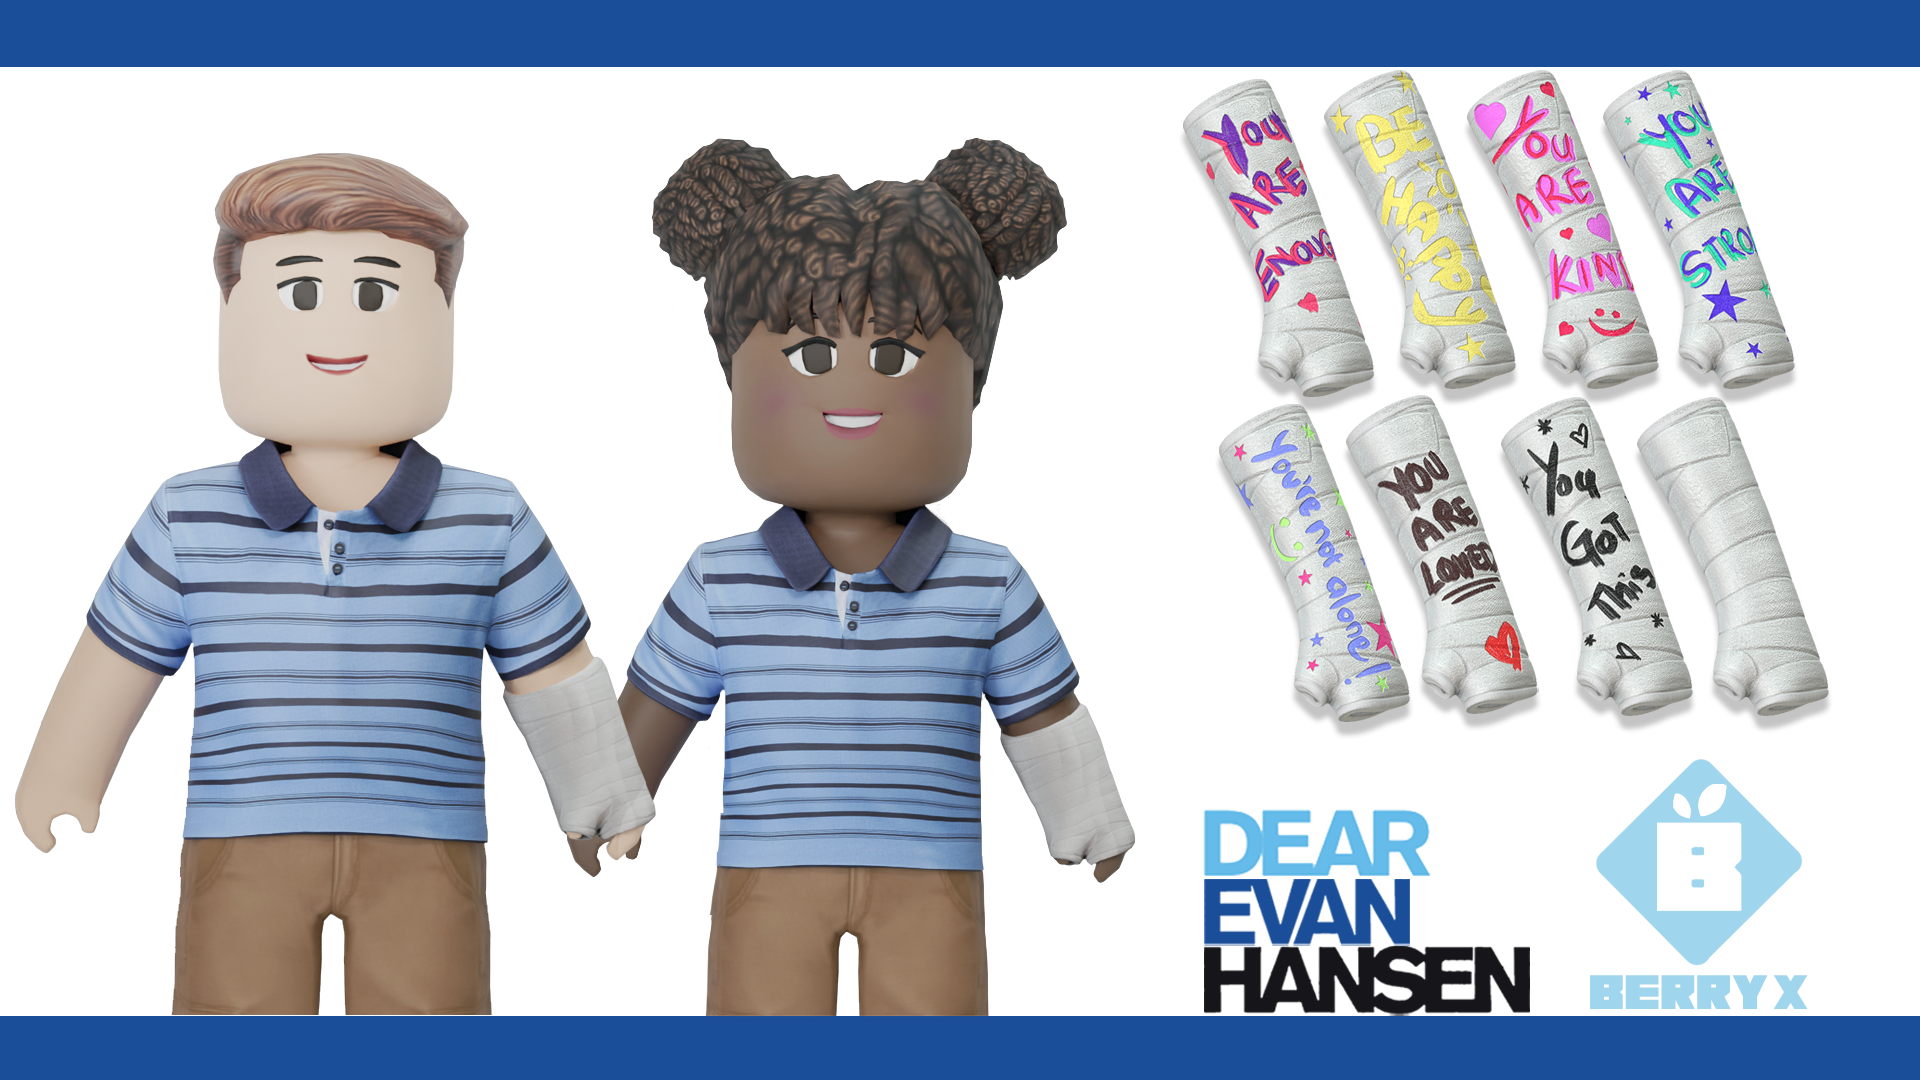 A digital version of Dear Evan Hansen's iconic blue striped polo will be available for purchase on Roblox, with 100% of the proceeds to benefit the Child Mind Institute